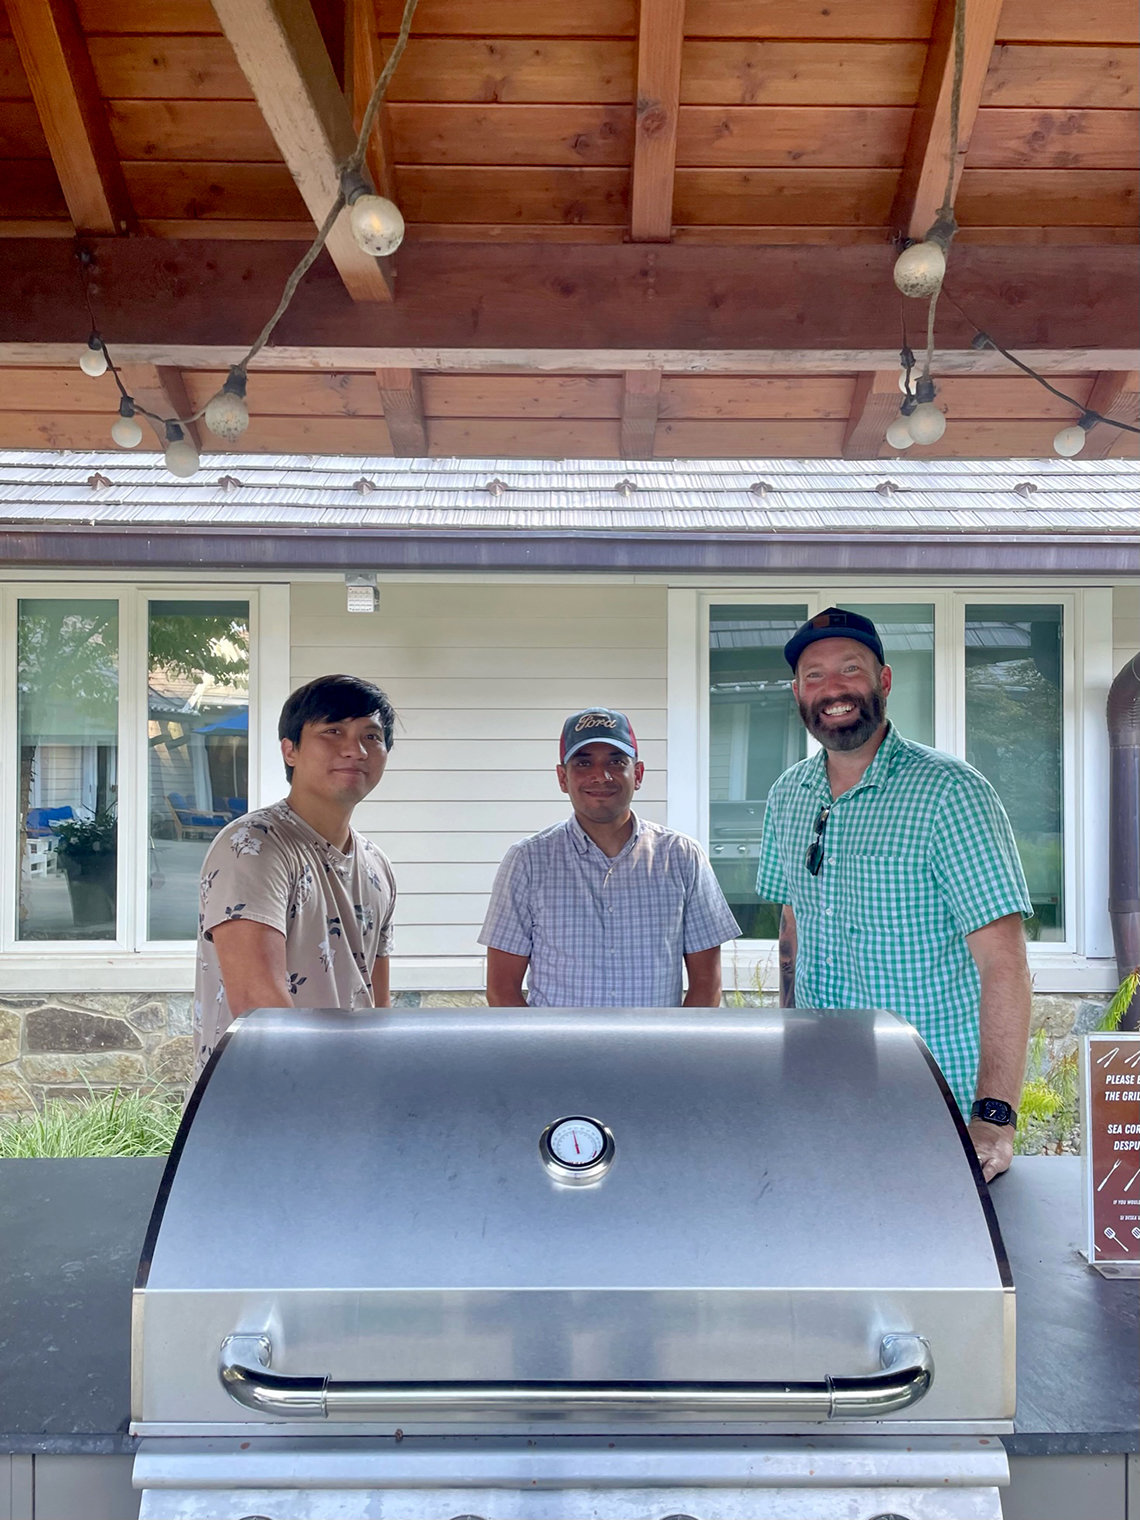 Three men stand behind an outdoor grill.